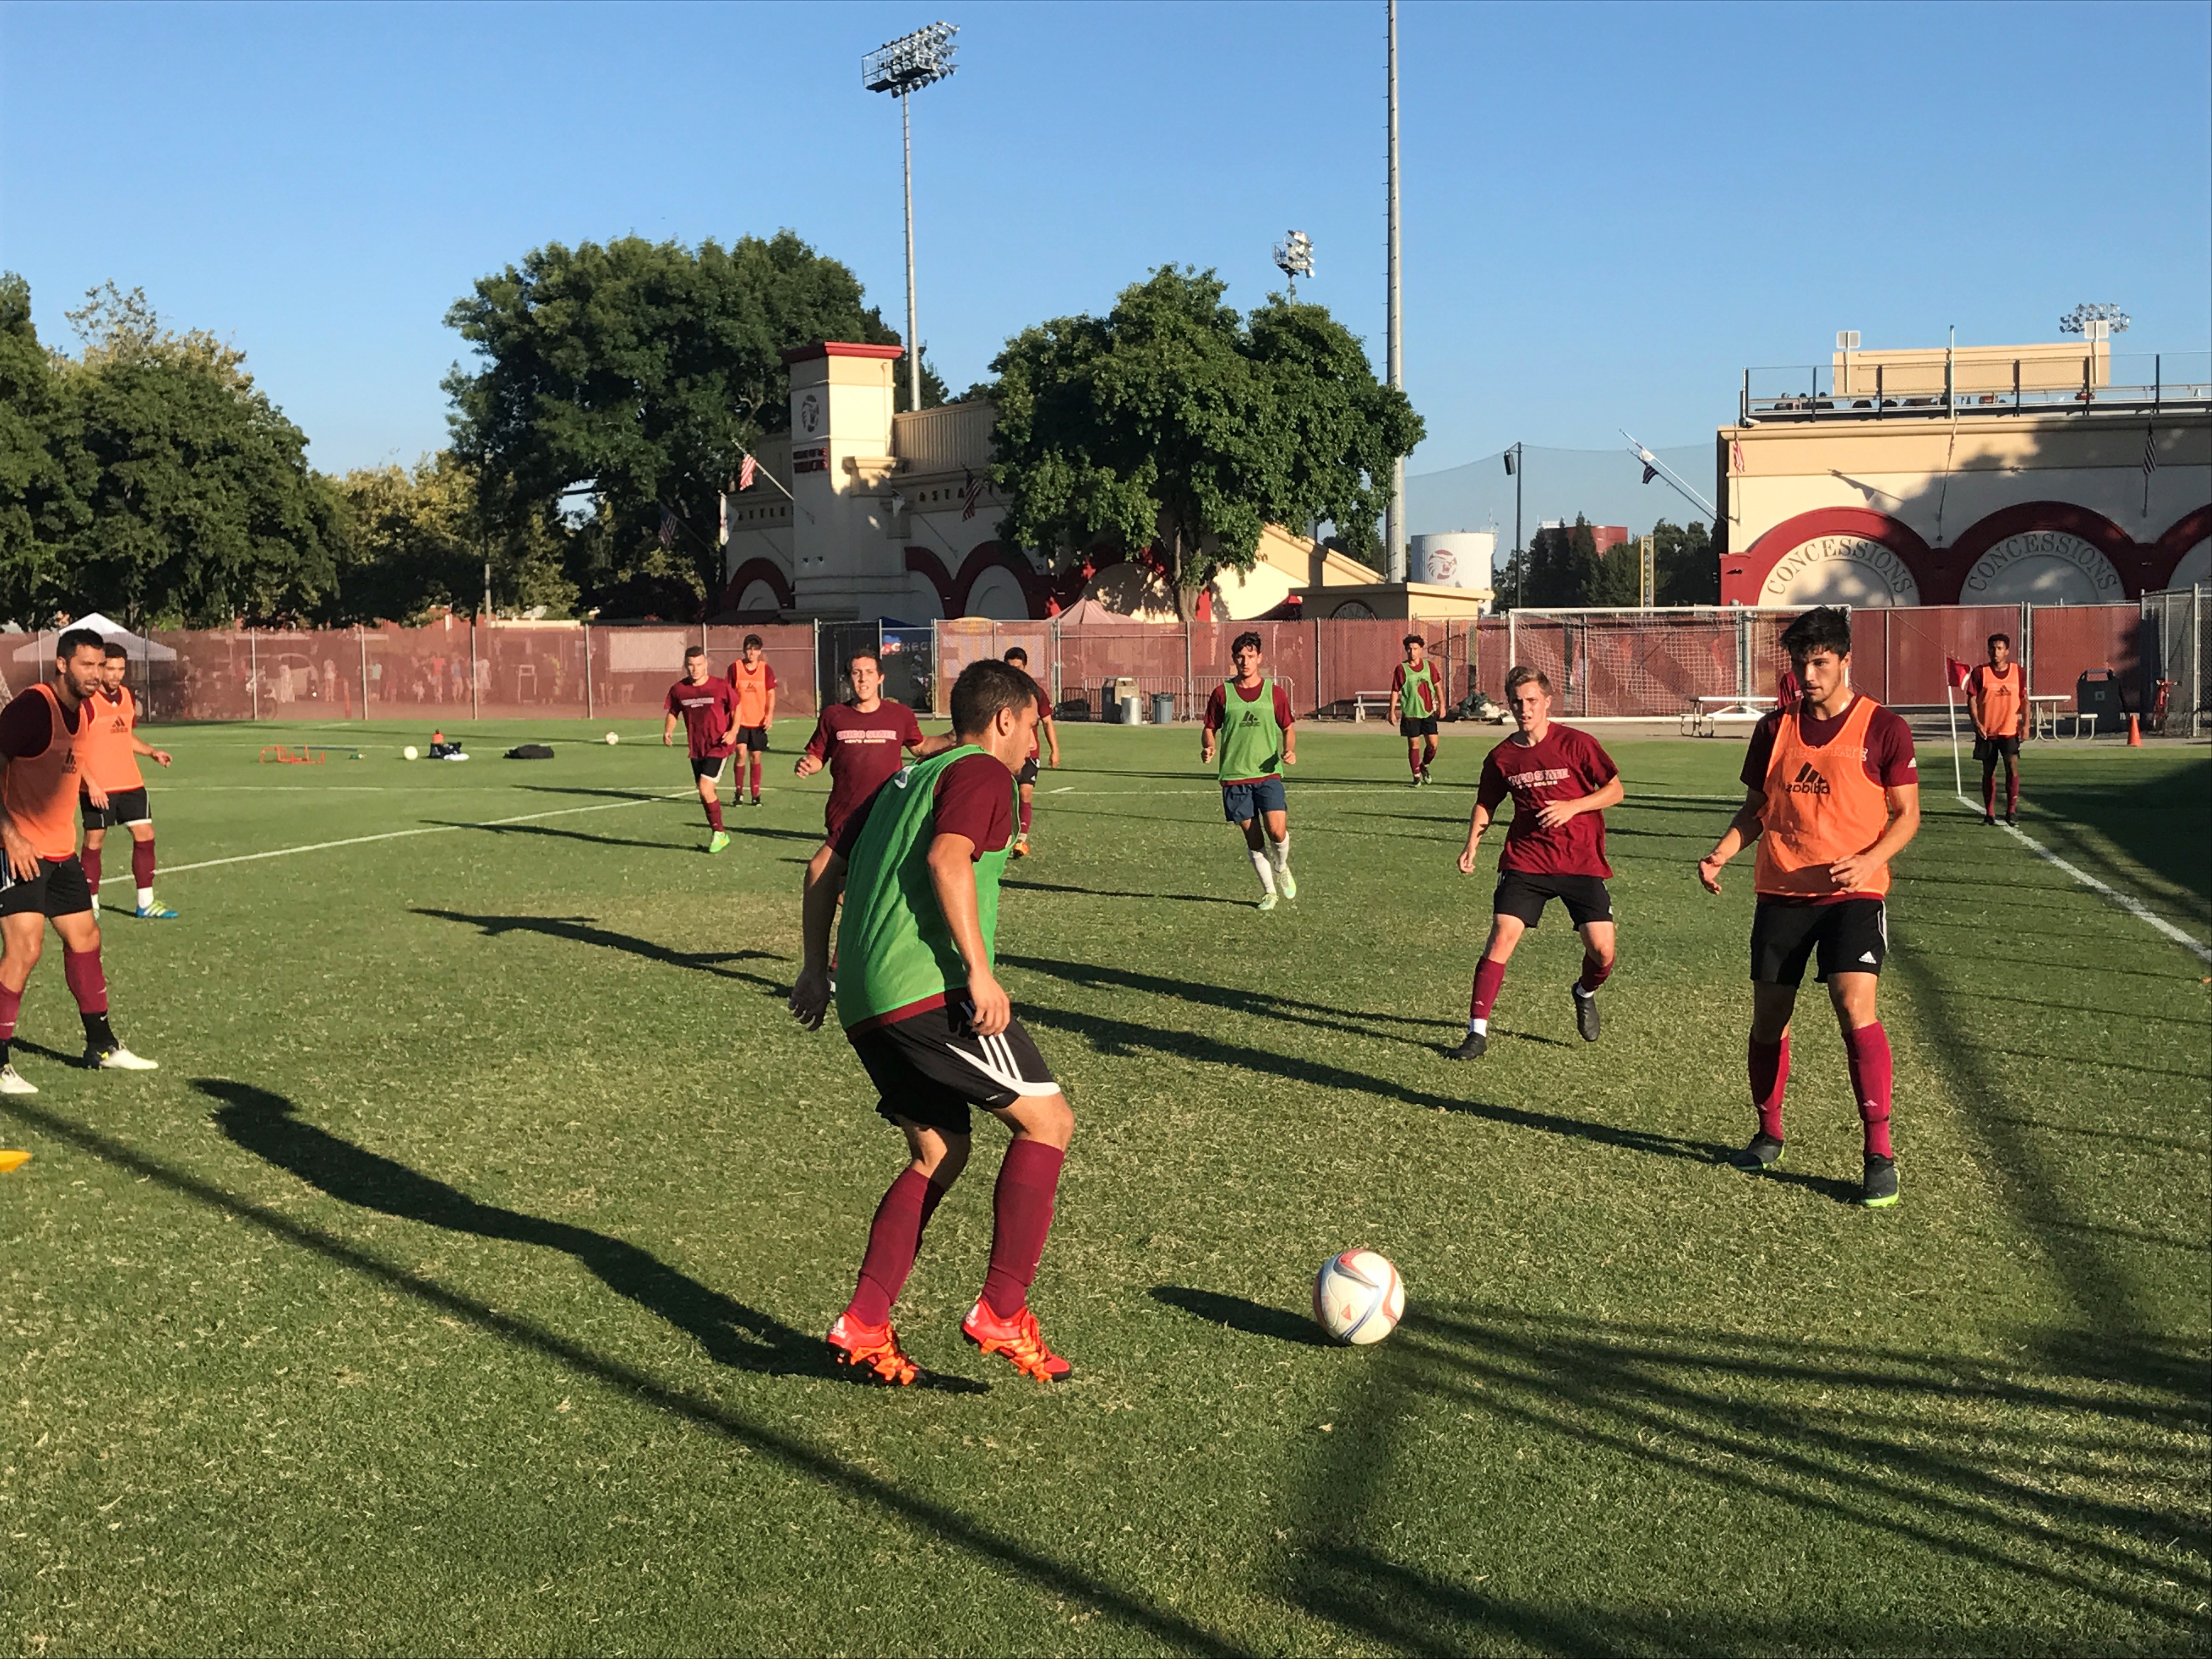 The Chico State men's soccer team trains last week at University Soccer Stadium. The entire team, as well as coaches, men's soccer alumni, and a few parents are traveling to Spain for an 11-day training and cultural immersion trip.